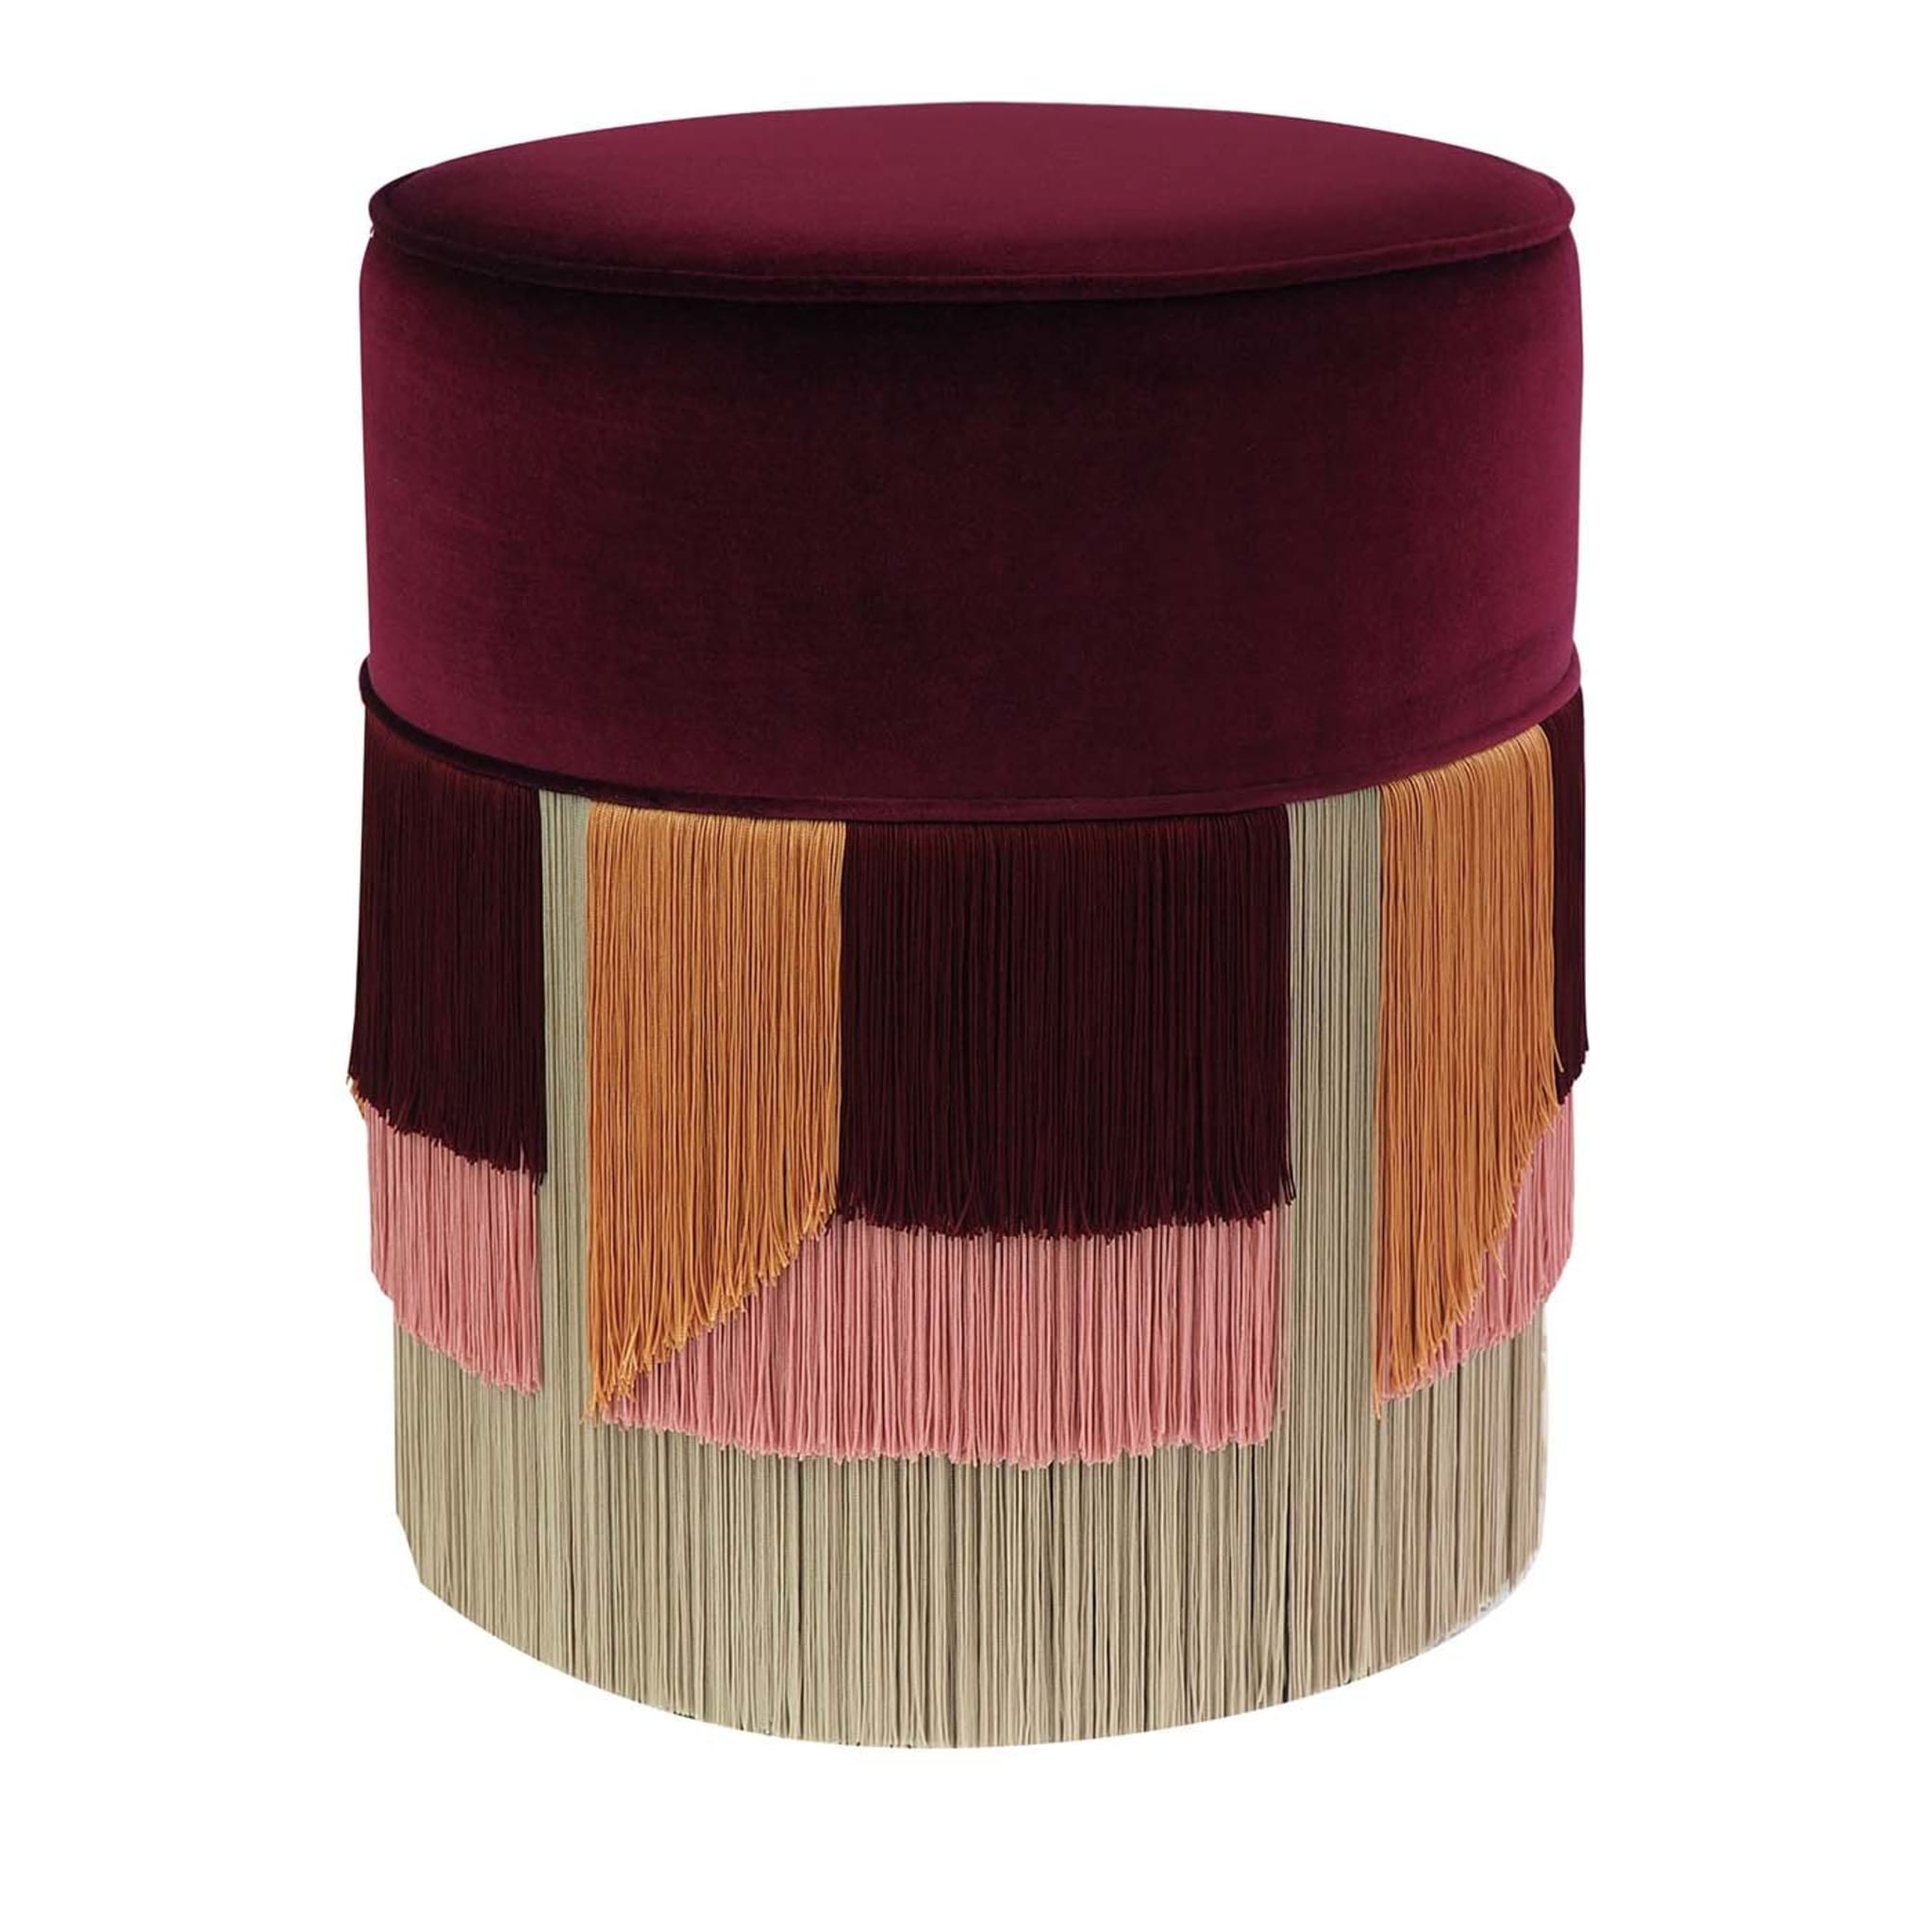 Burgundy Cylinder Wood Ottoman with Velvet Upholstery - Main view